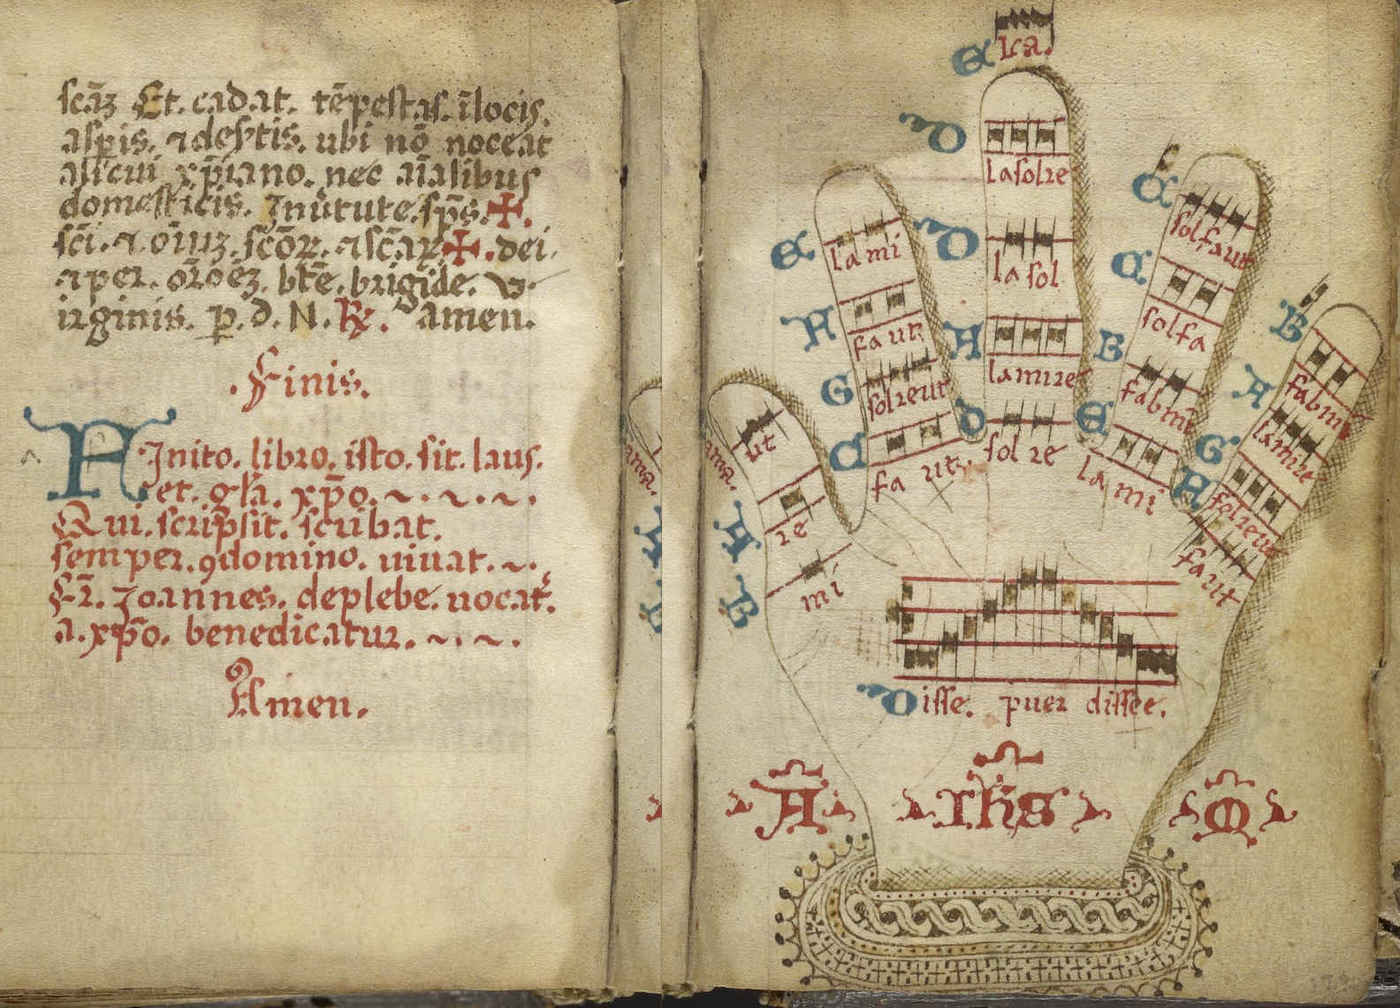 Italian monastic music manuscript explaining the Guidonian hand musical mnemonic, using rubrication for emphasis against the musical scales, falling back to blue for additional material; pg121–122 of Liturgical Manuscript (Ms. Codex 1248) dated 1450–1500AD.